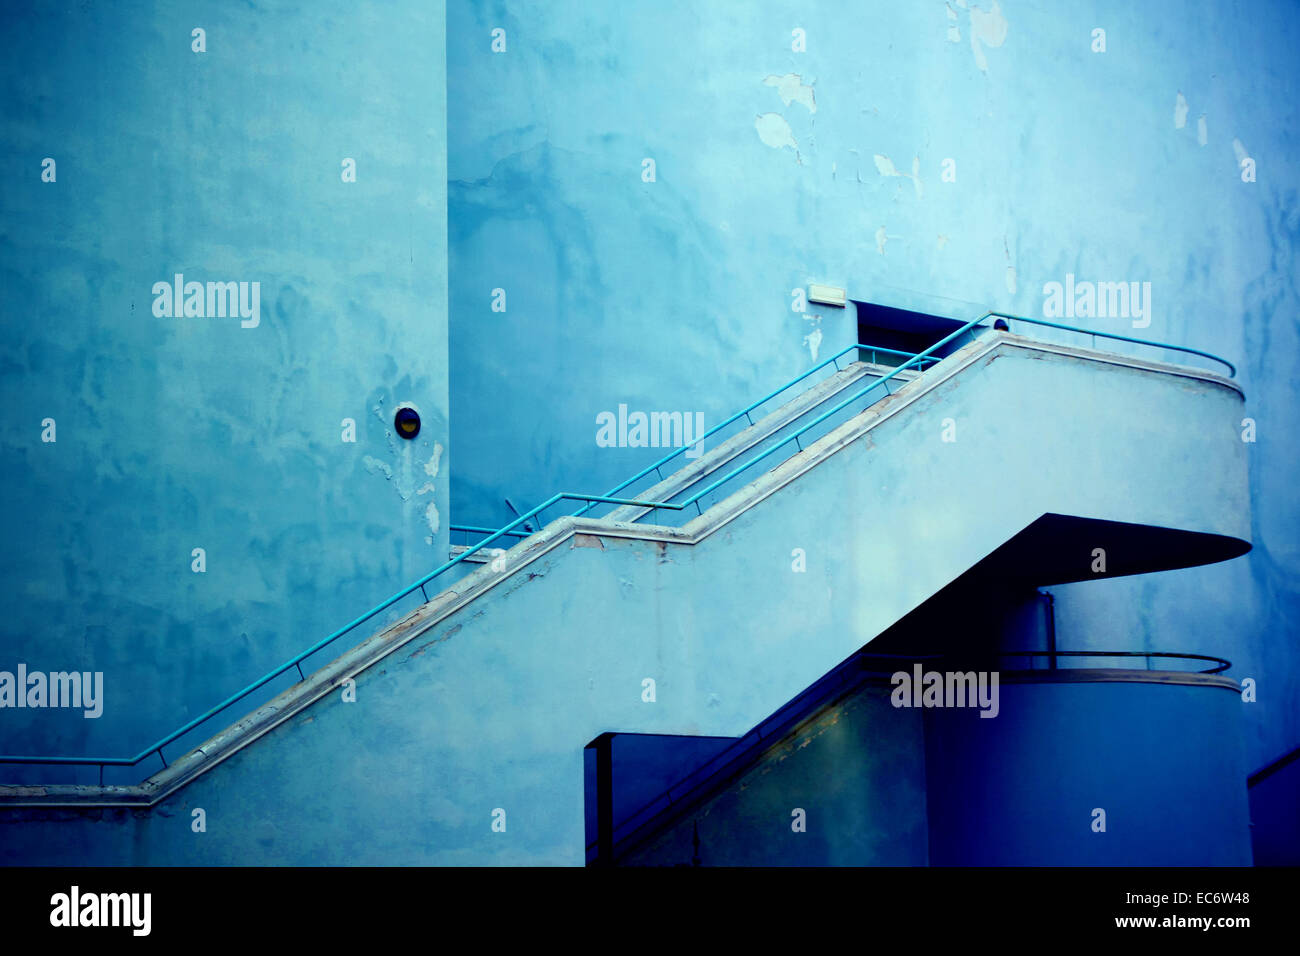 House facade with external staircase in blue tones with a slight vignette, Italy Brescia Stock Photo